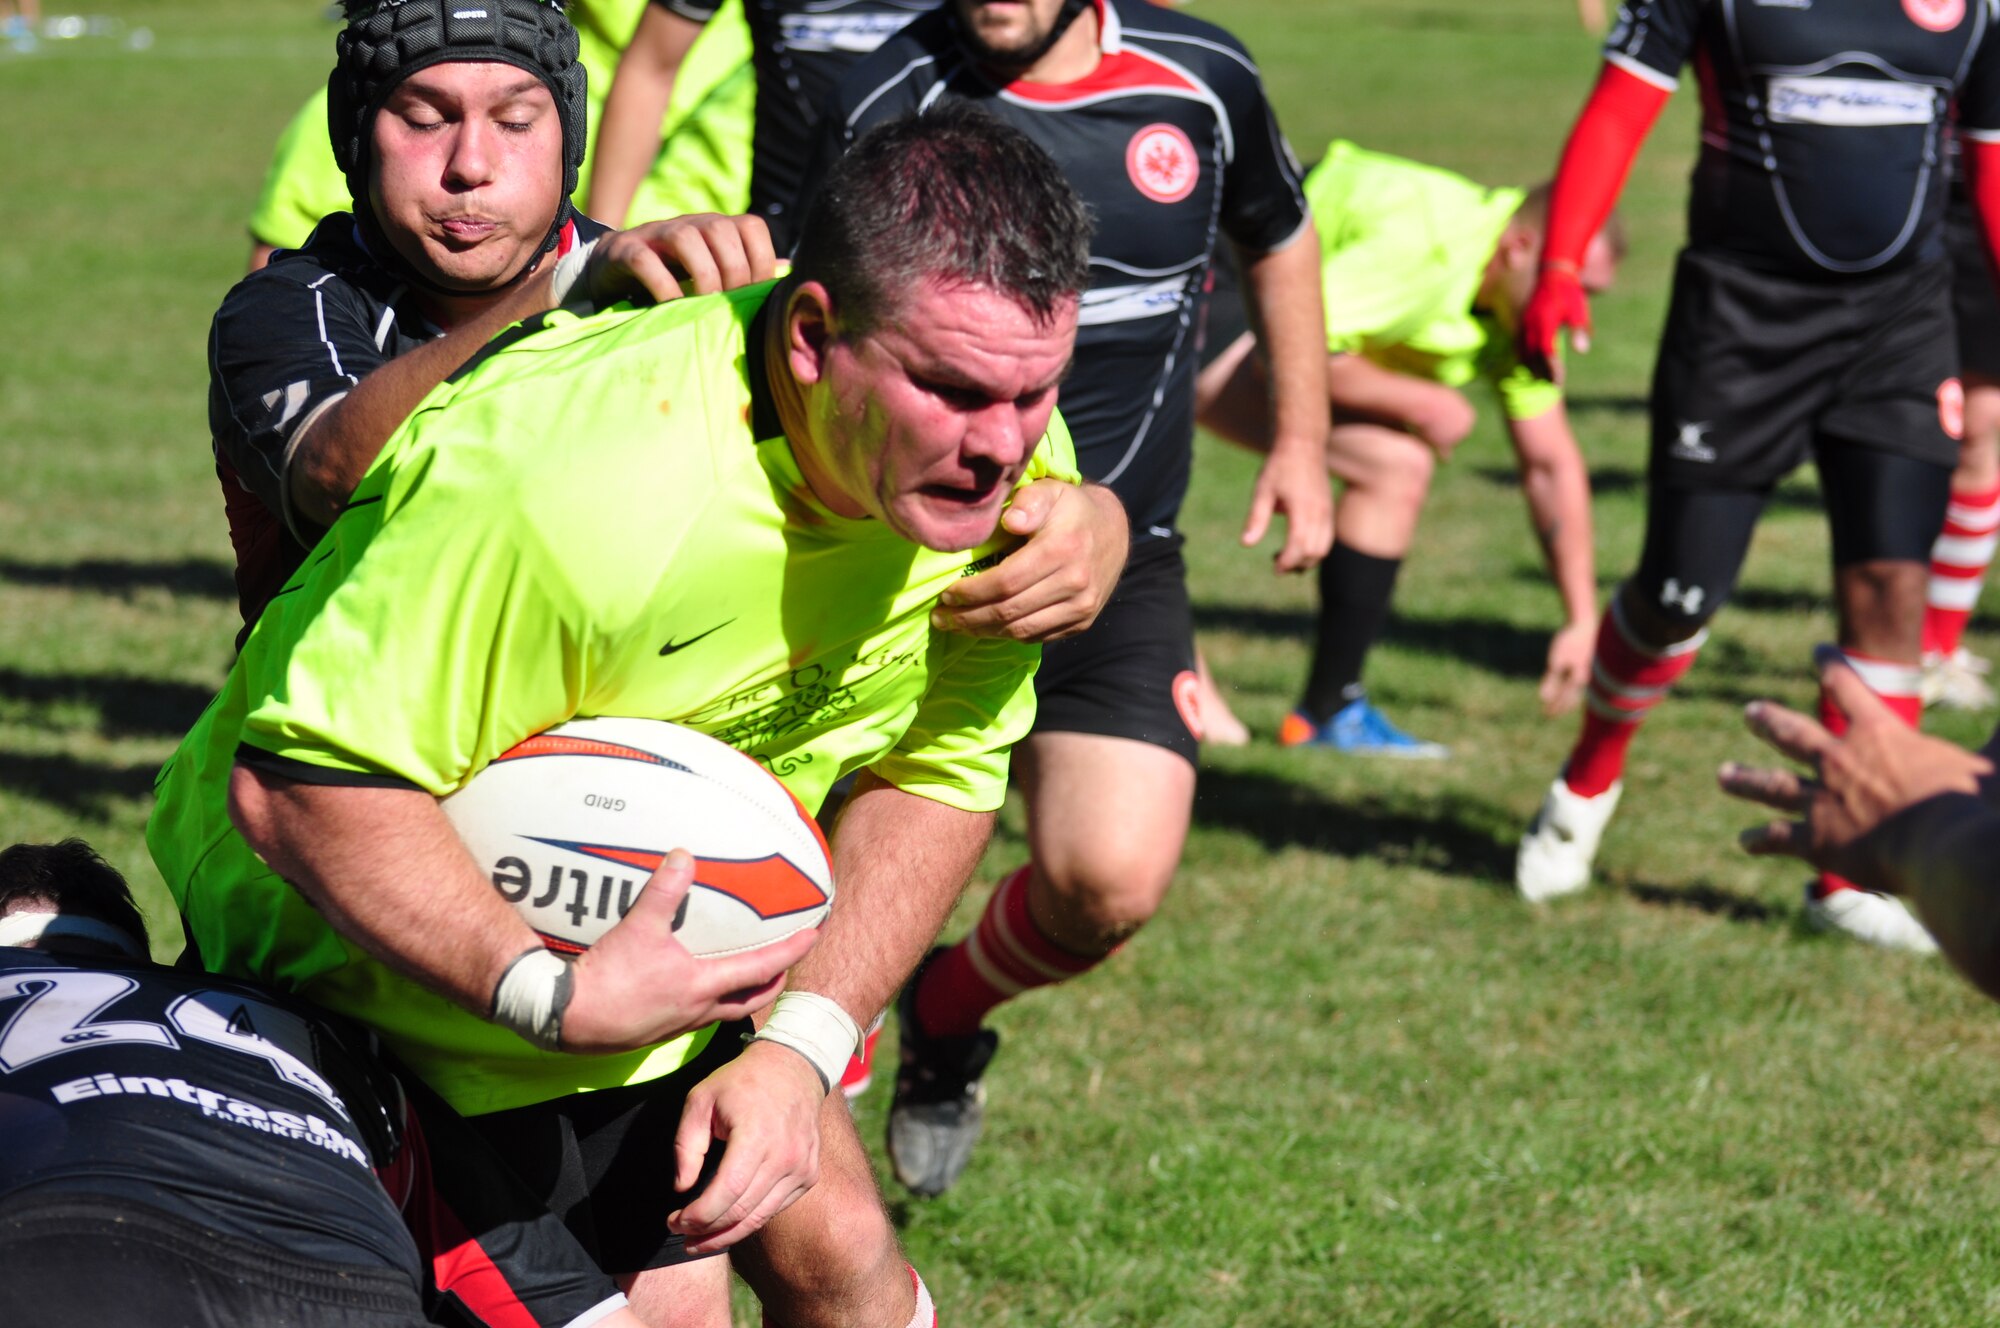 Master Sgt. Shane Hiett, 86th Aircraft Maintenance Squadron flight chief, runs the ball for the Ramstein Rogues during a Division-II rugby match at the Queidersbach SportPlatz Sept. 8, 2012. The Rogues beat the Eintracht Frankfurt team 45-15. (U.S. Air Force photo/Tech. Sgt. Chad Thompson)